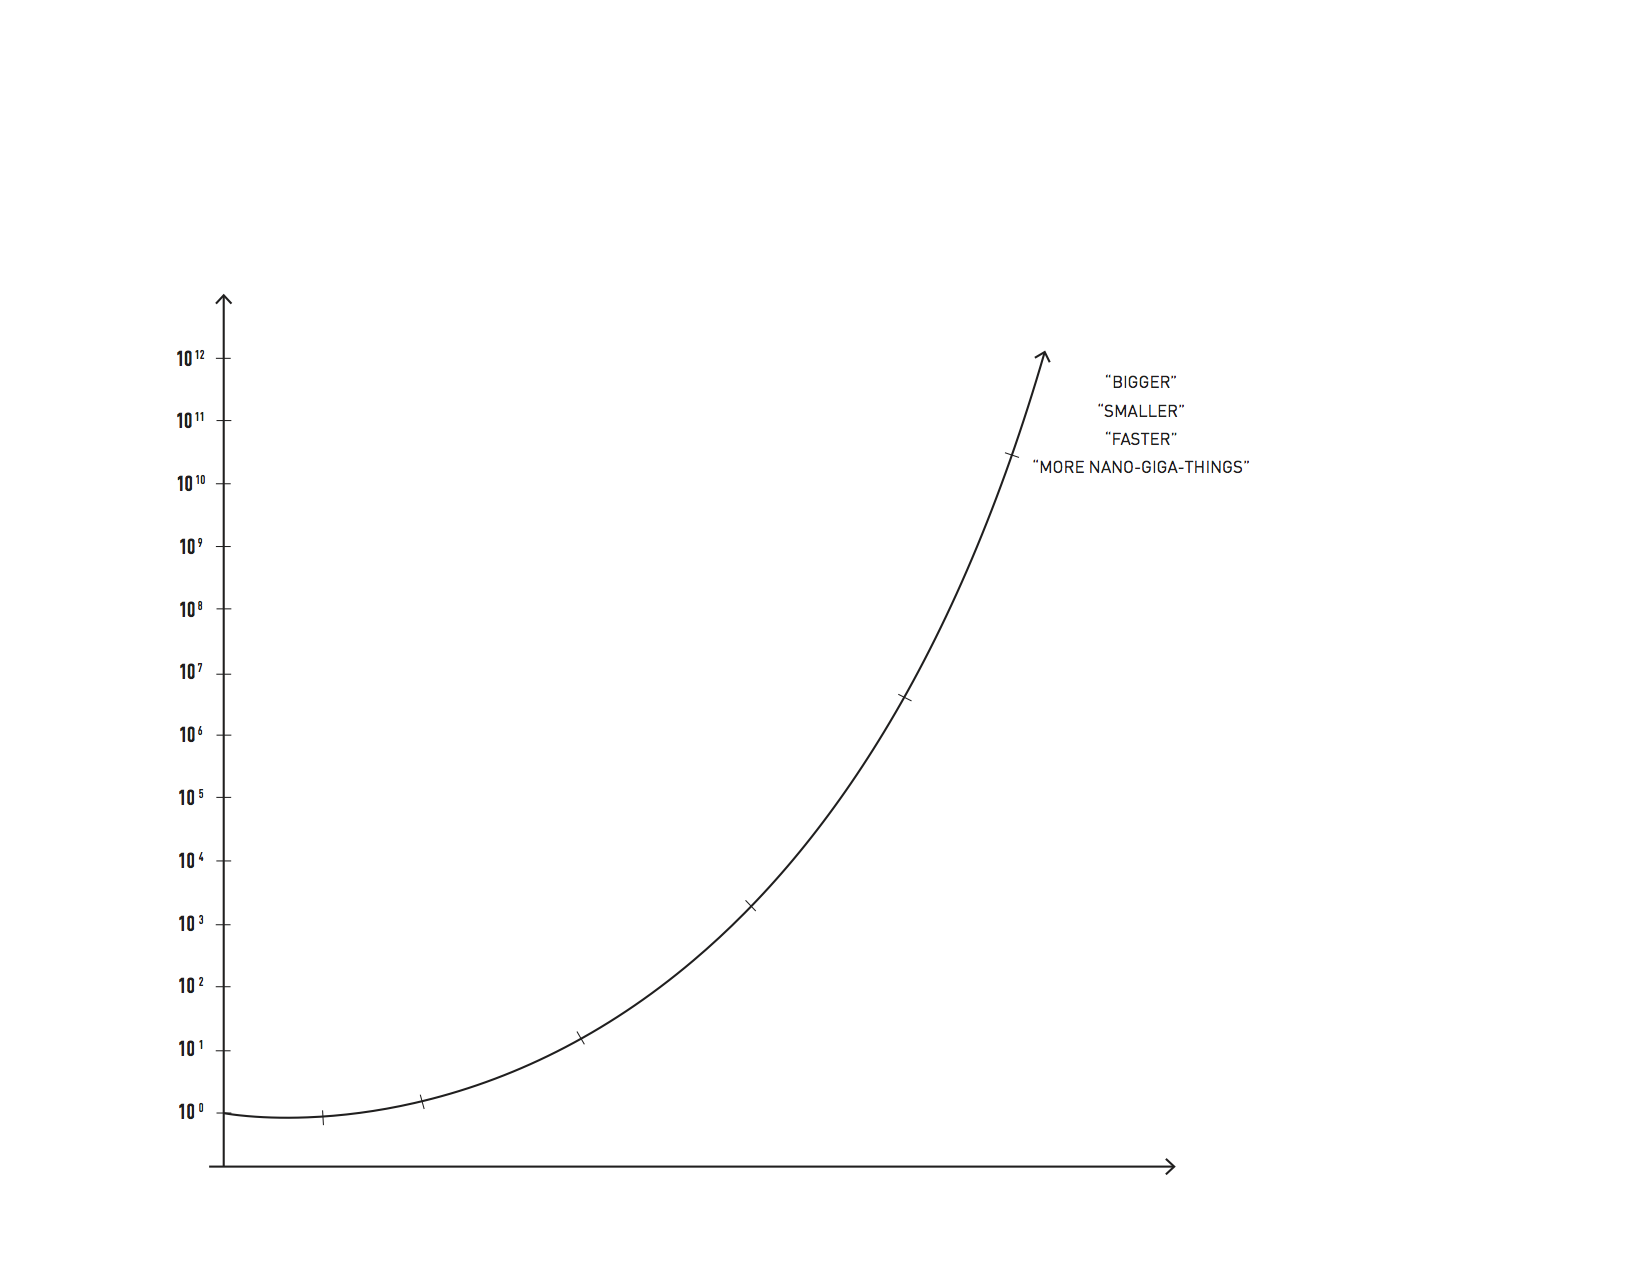 A graph going towards the future exponentially better